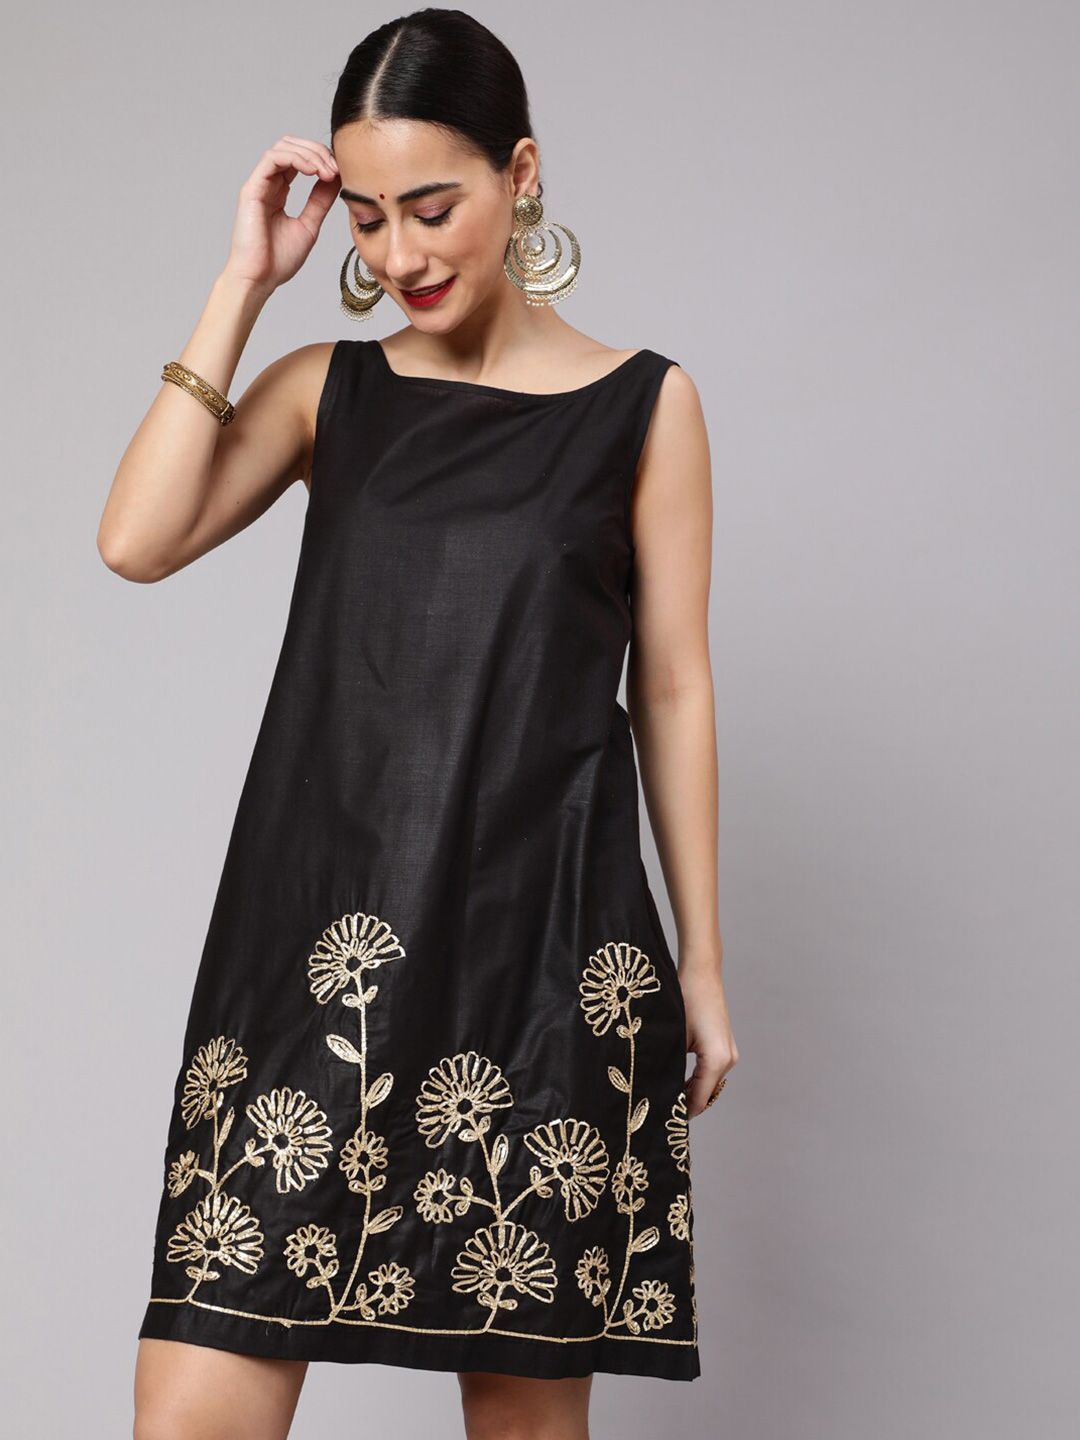 AKS Round Neck Floral Printed Gotta Patti Detail A-Line Cotton Knee Length Dress Price in India